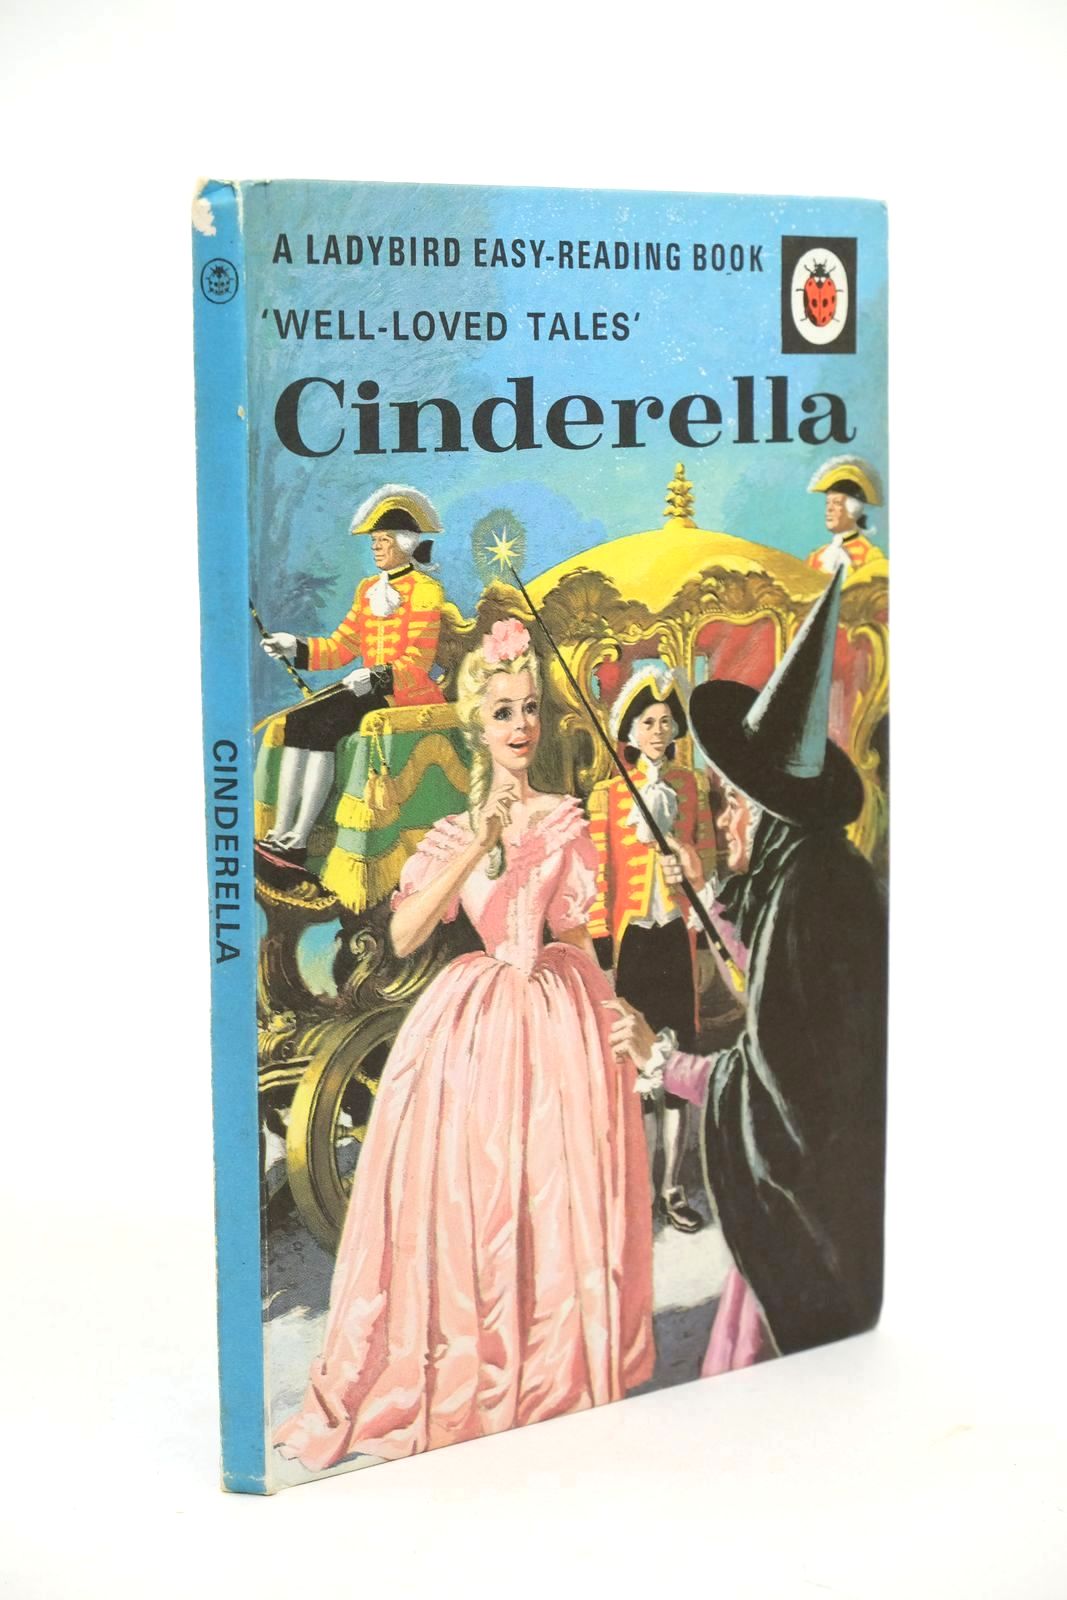 Photo of CINDERELLA written by Southgate, Vera illustrated by Winter, Eric published by Wills &amp; Hepworth Ltd. (STOCK CODE: 1323157)  for sale by Stella & Rose's Books